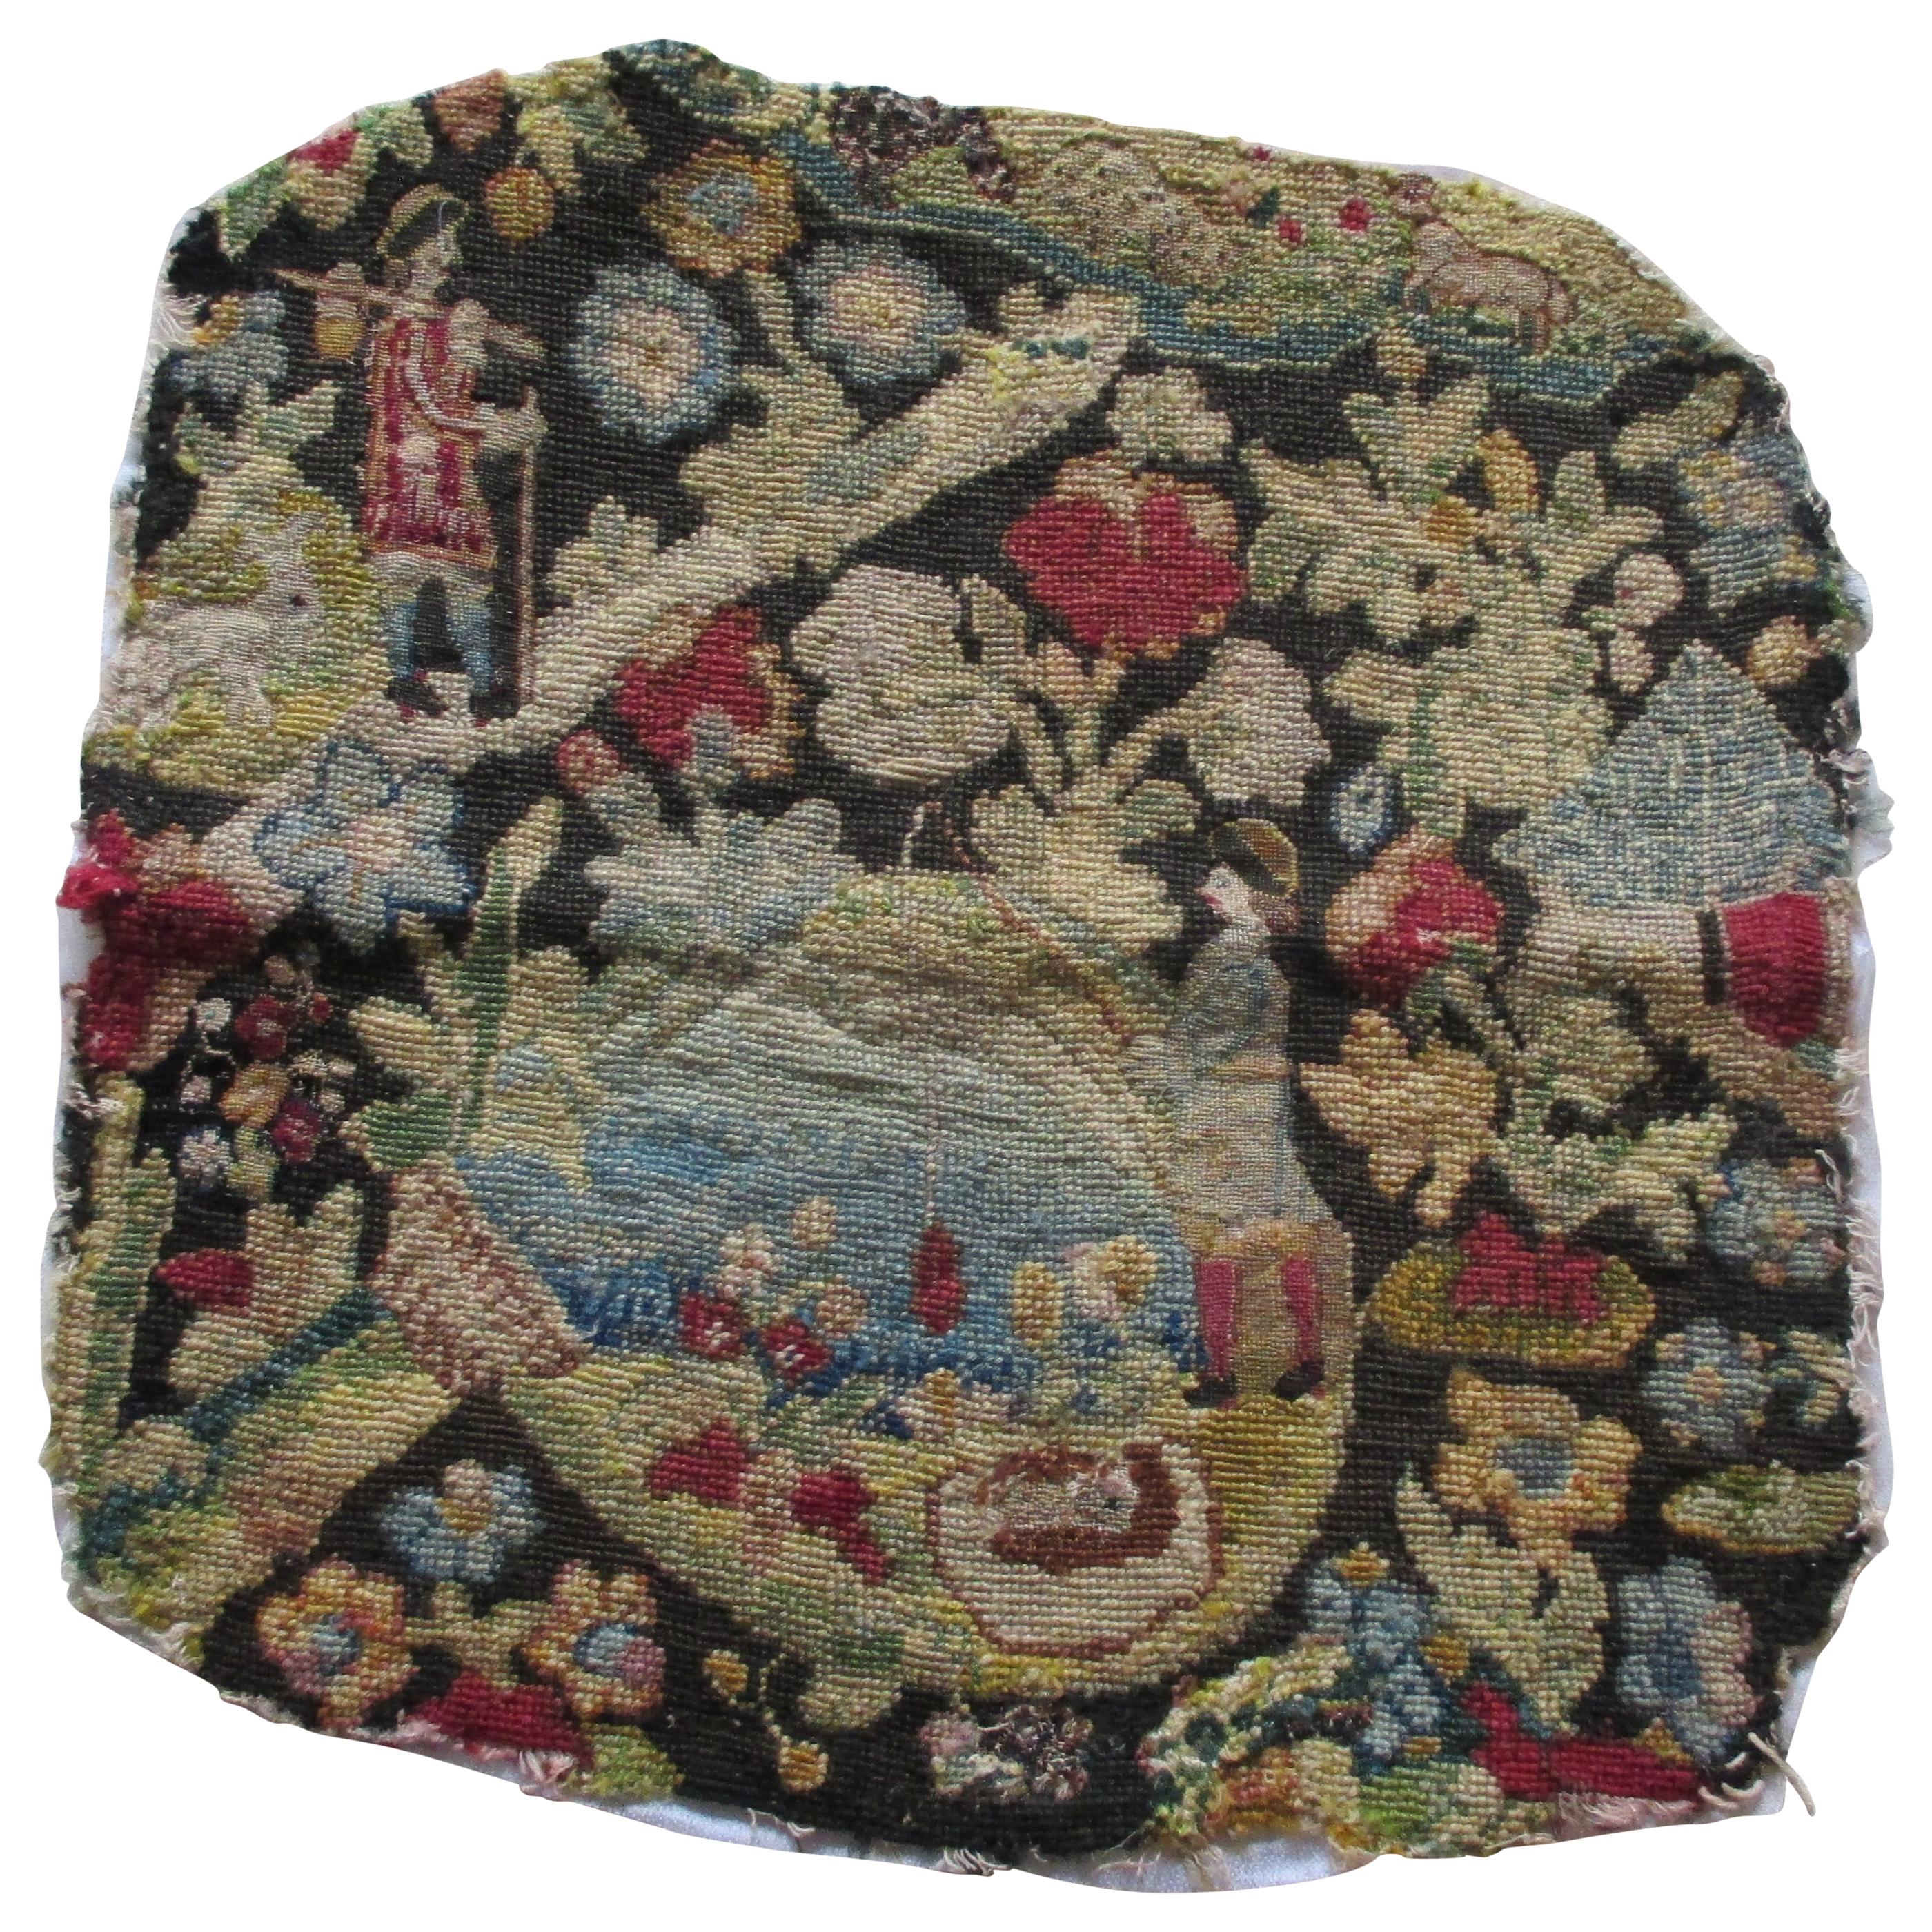 Antique Petit Point Tapestry Fragment Portraying a Rustic Scene